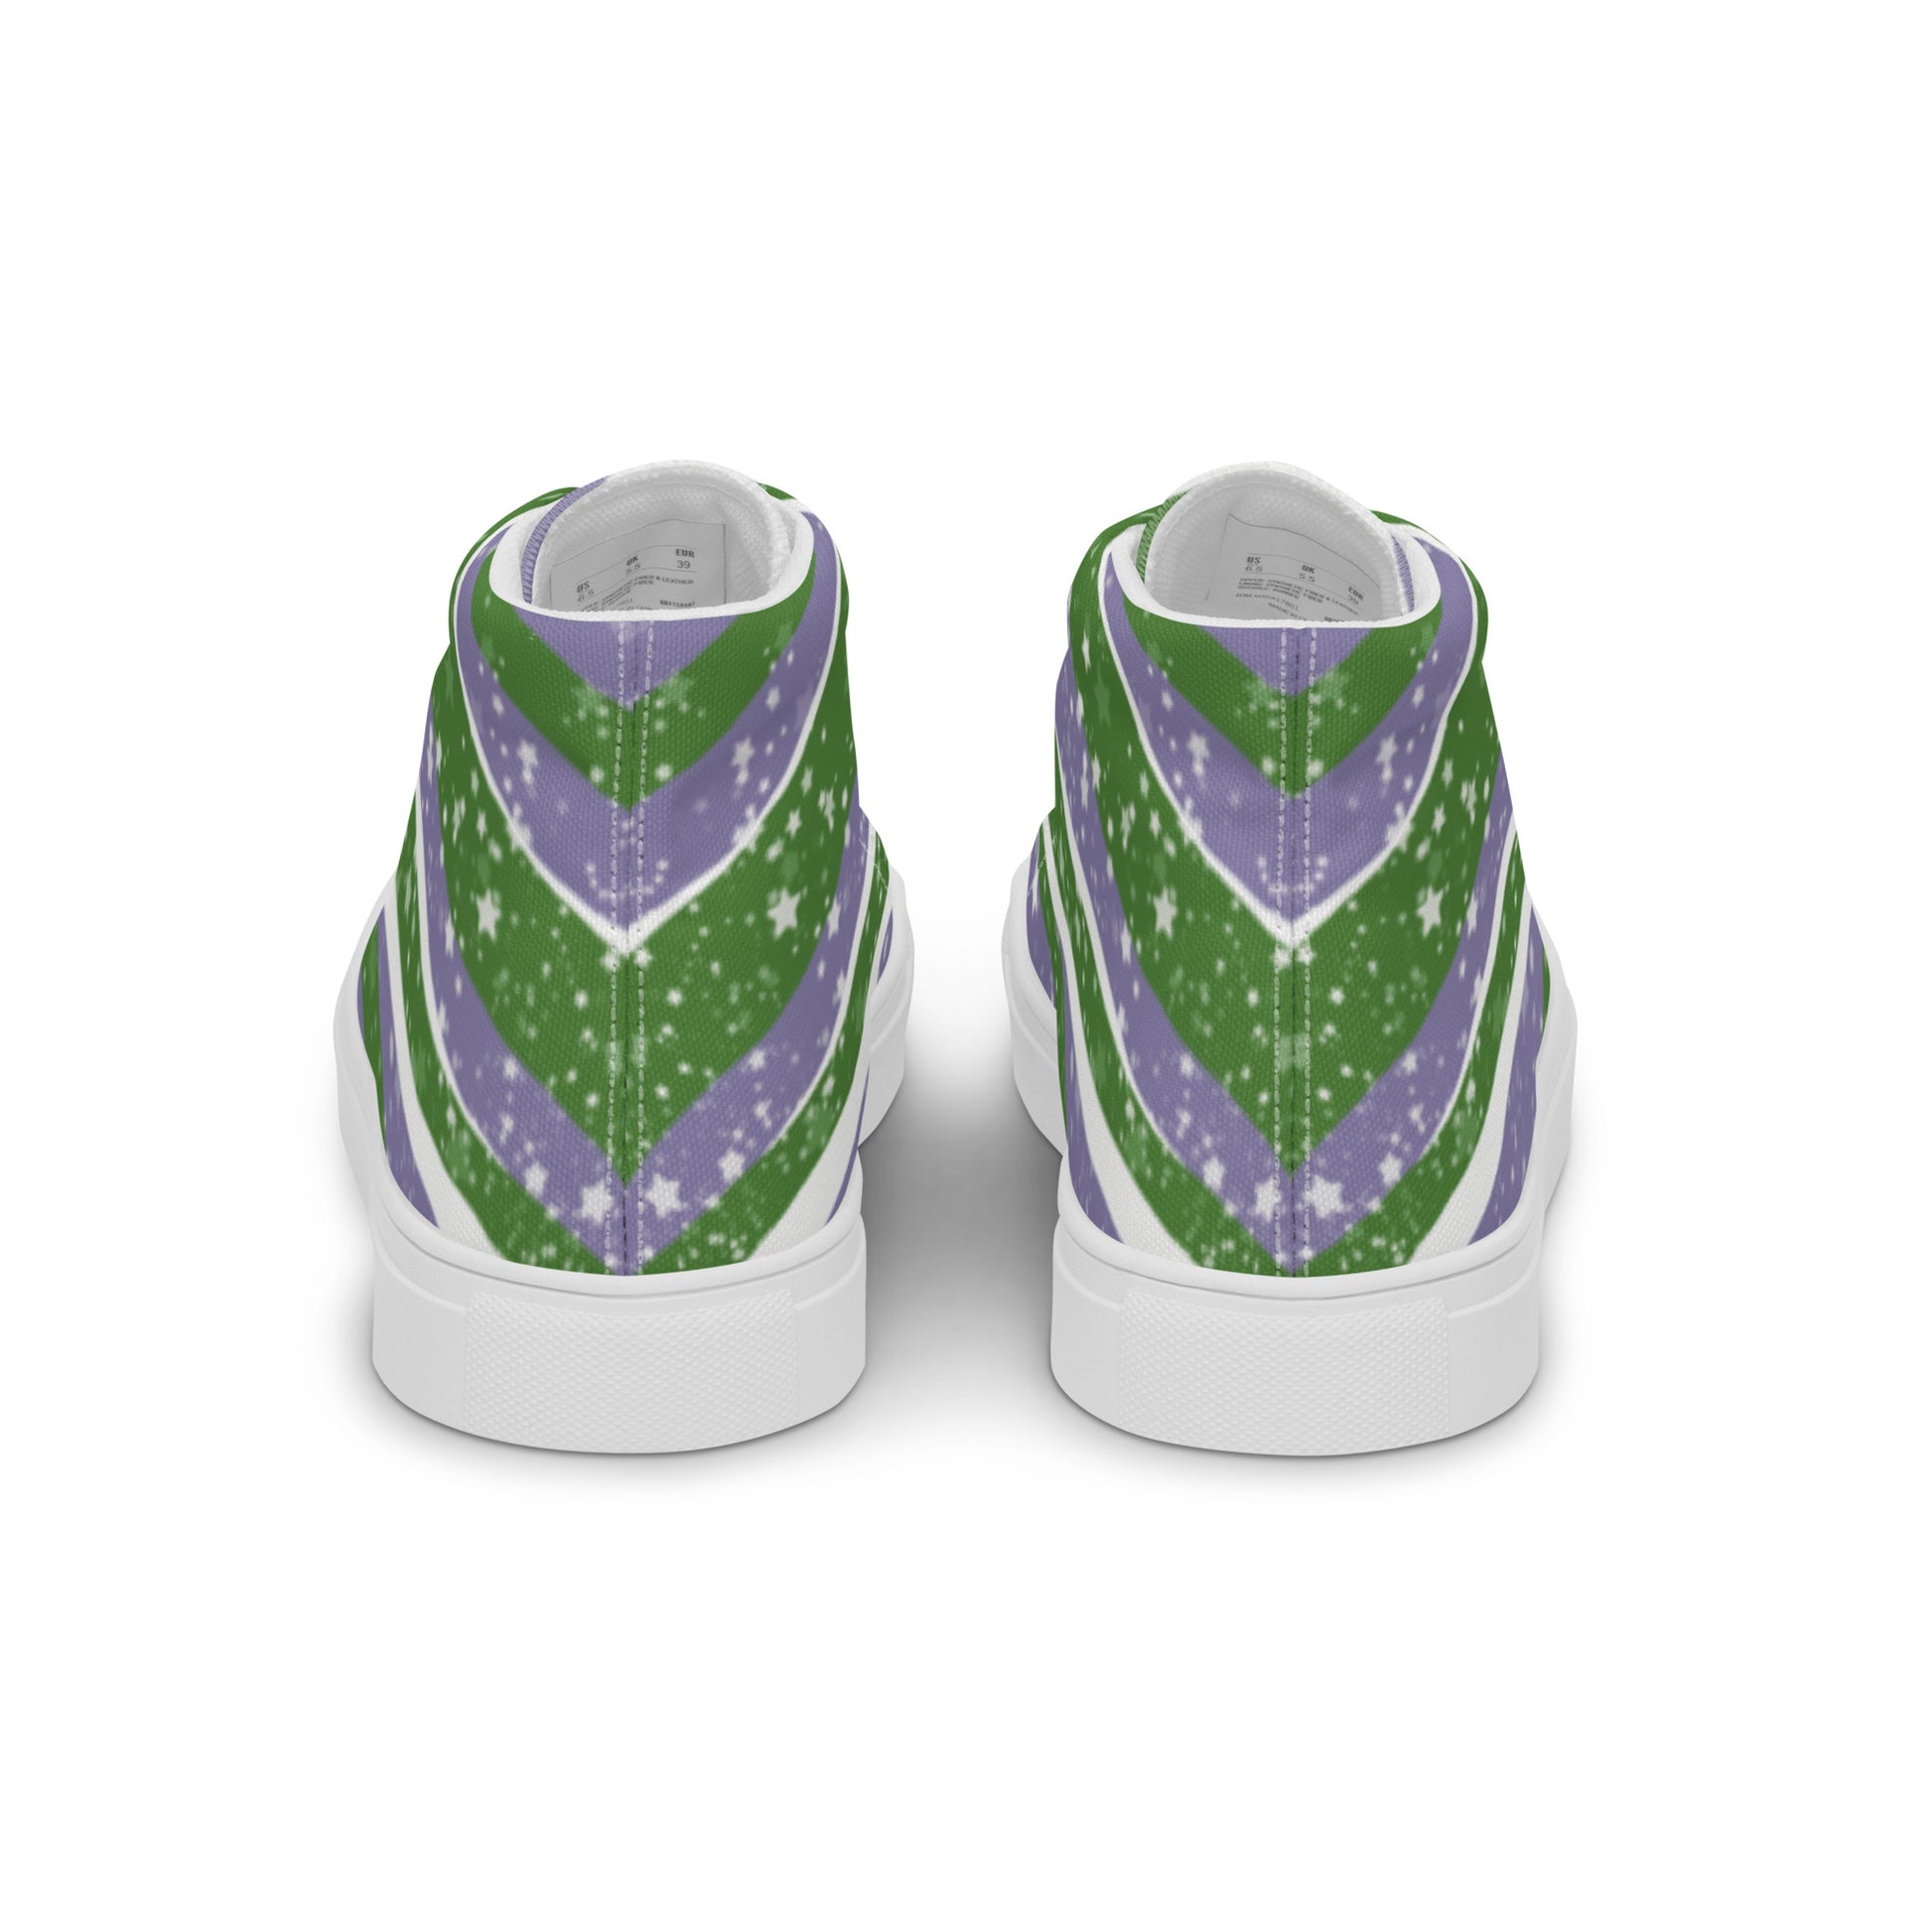 Back view: a pair of high top shoes with green, purple, and white ribbons that get larger from heel to laces, white stars, and the Aras Sivad logo on the tongue.